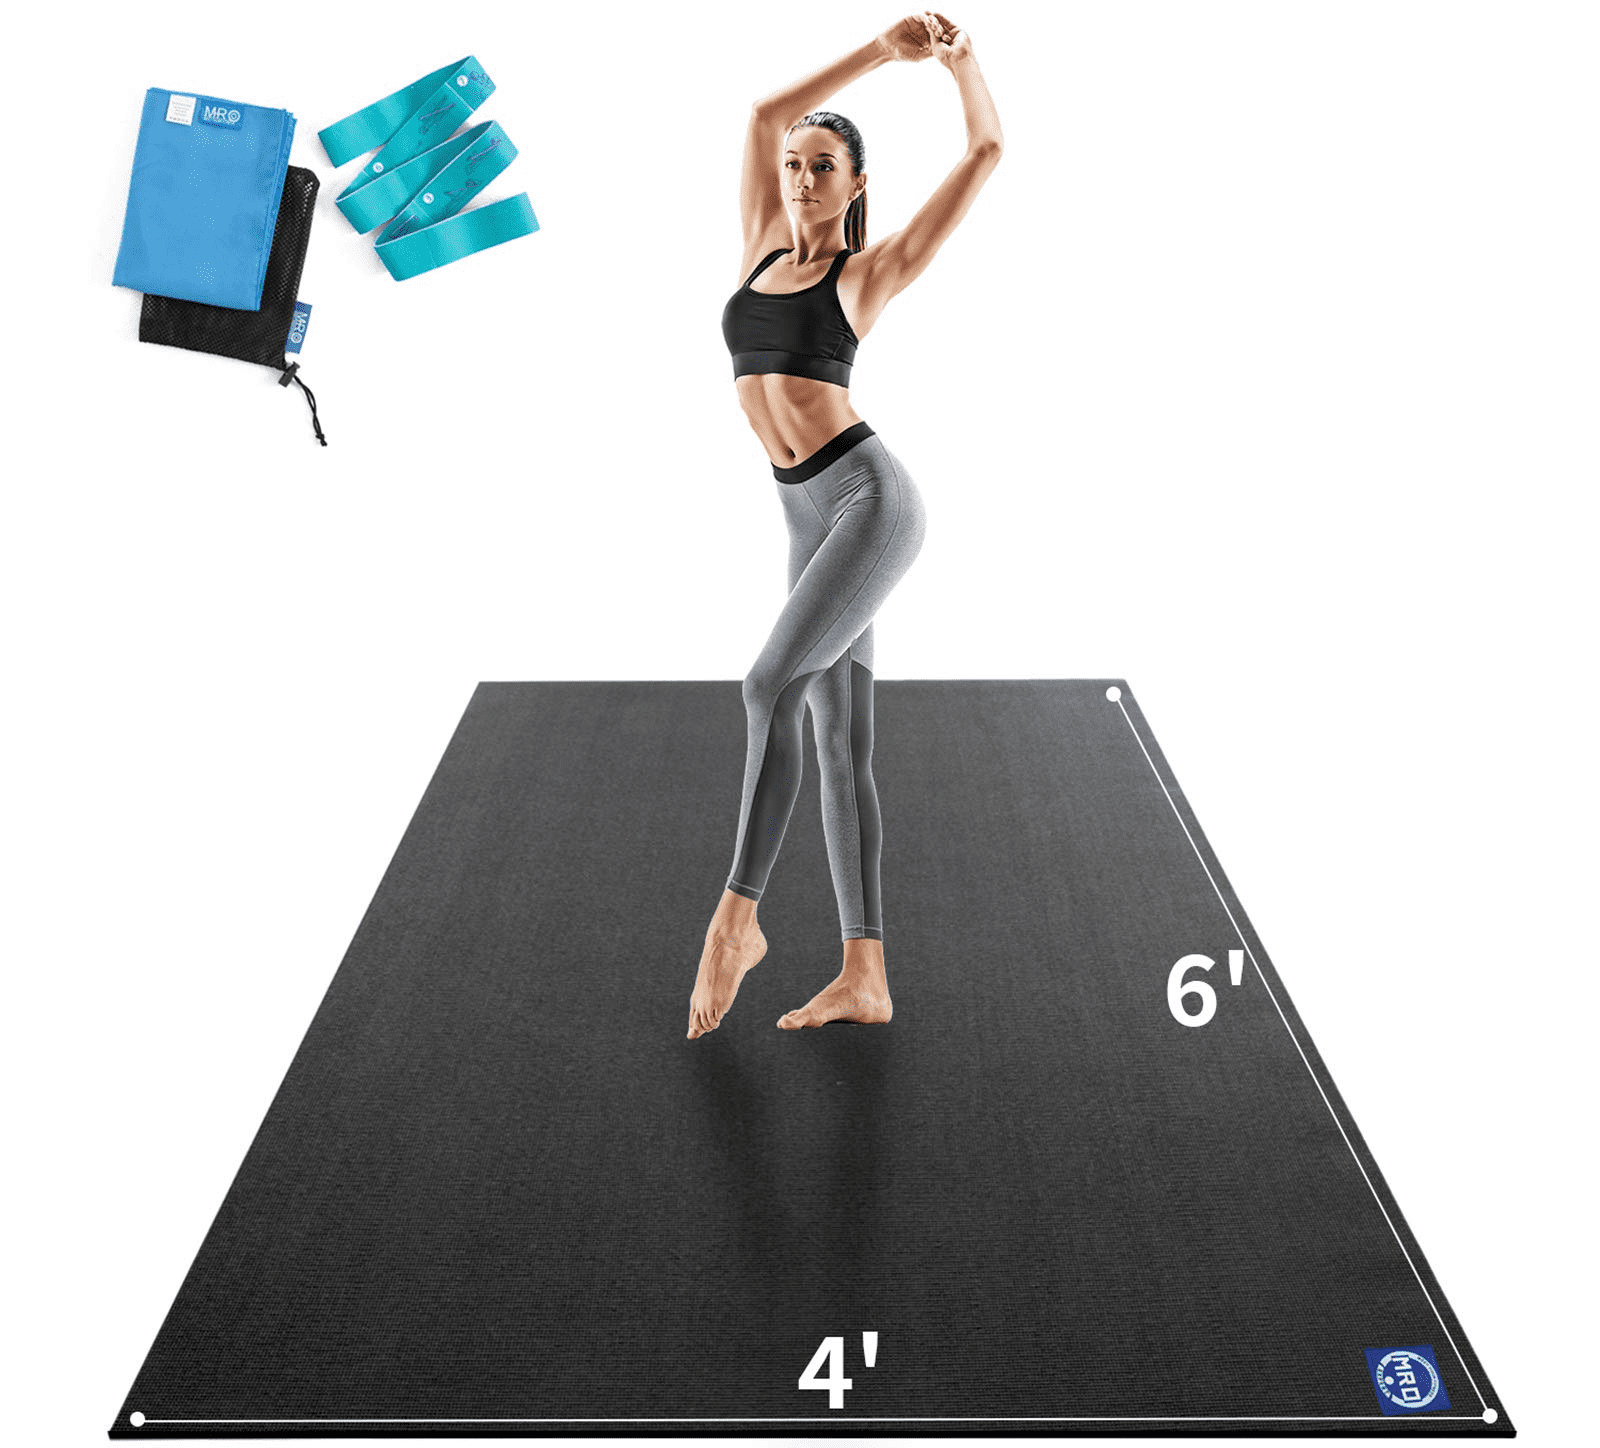 Yoga Mat Non-Slip Gymnastic Fitness Workout Physio Pilates Exercise Thick Large 